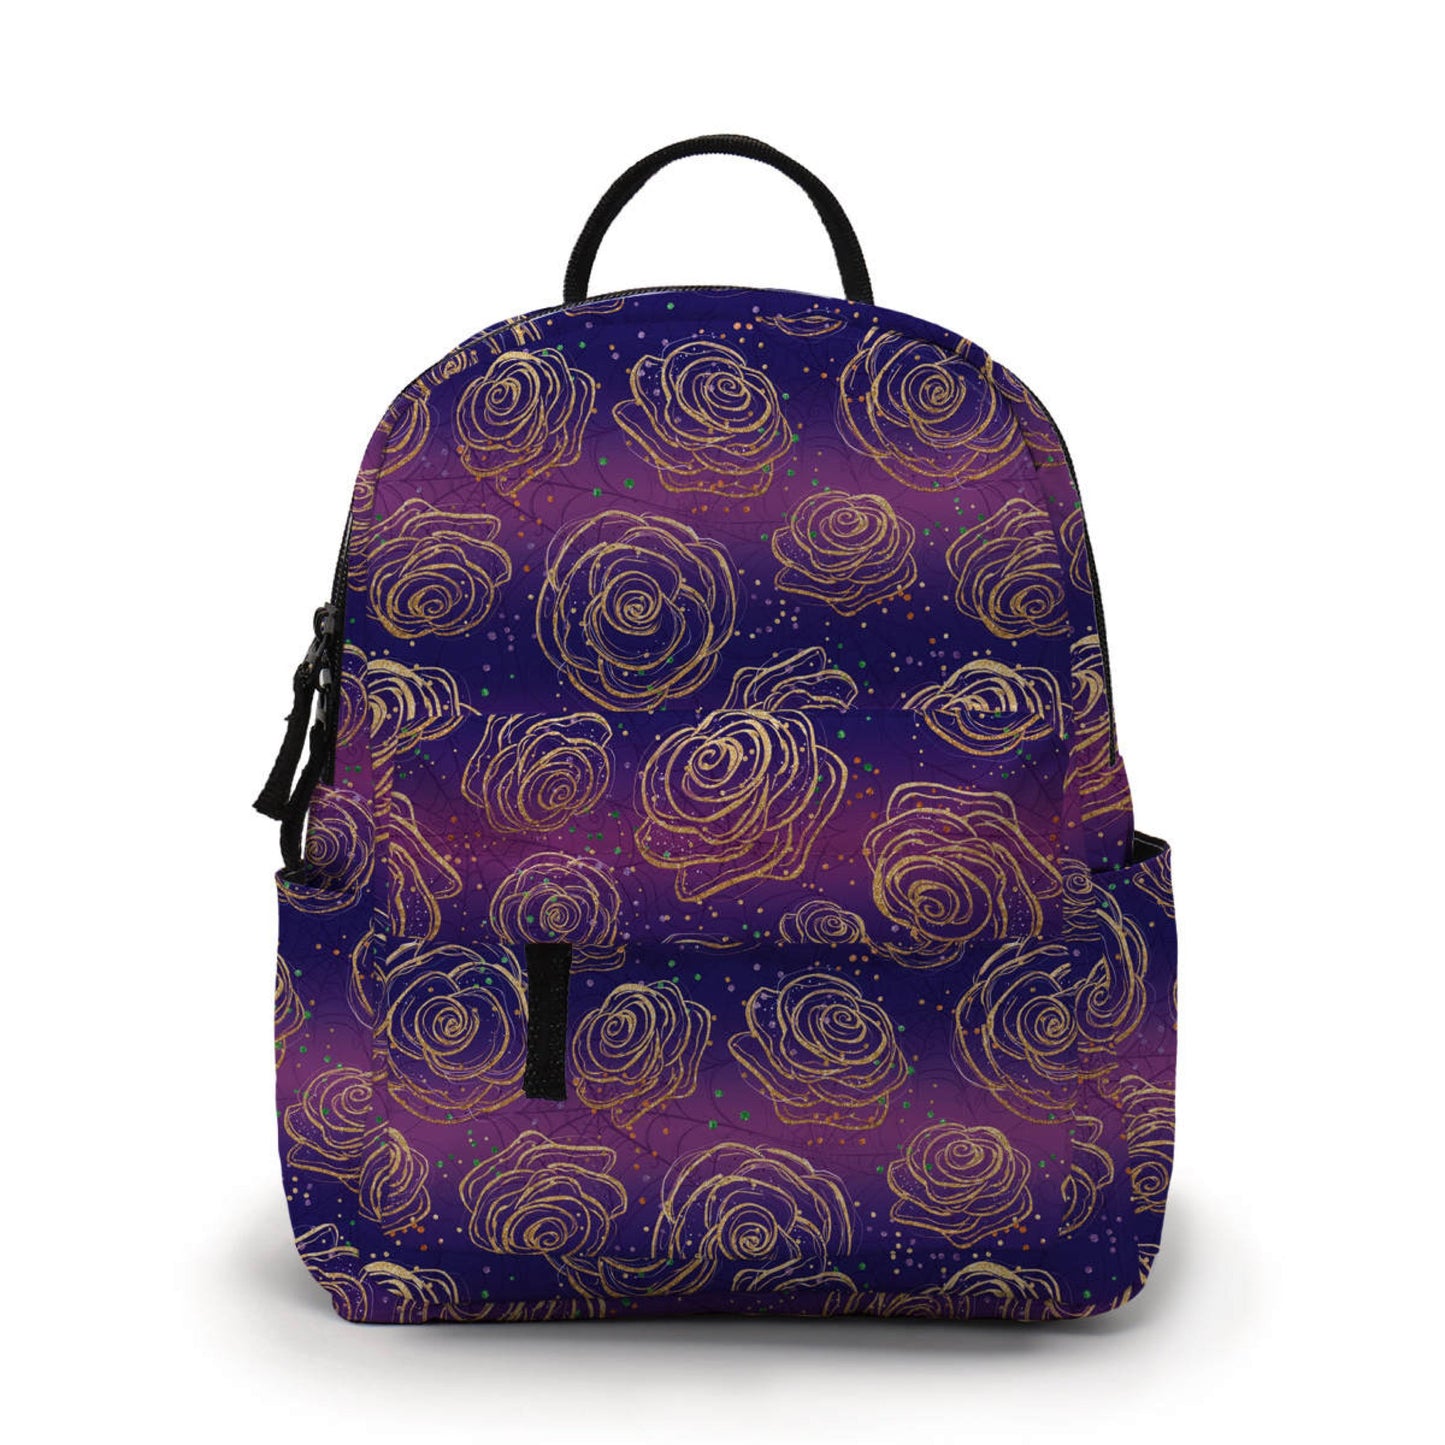 Mini Backpack - Purple Spider Web Roses - Three Bears Boutique